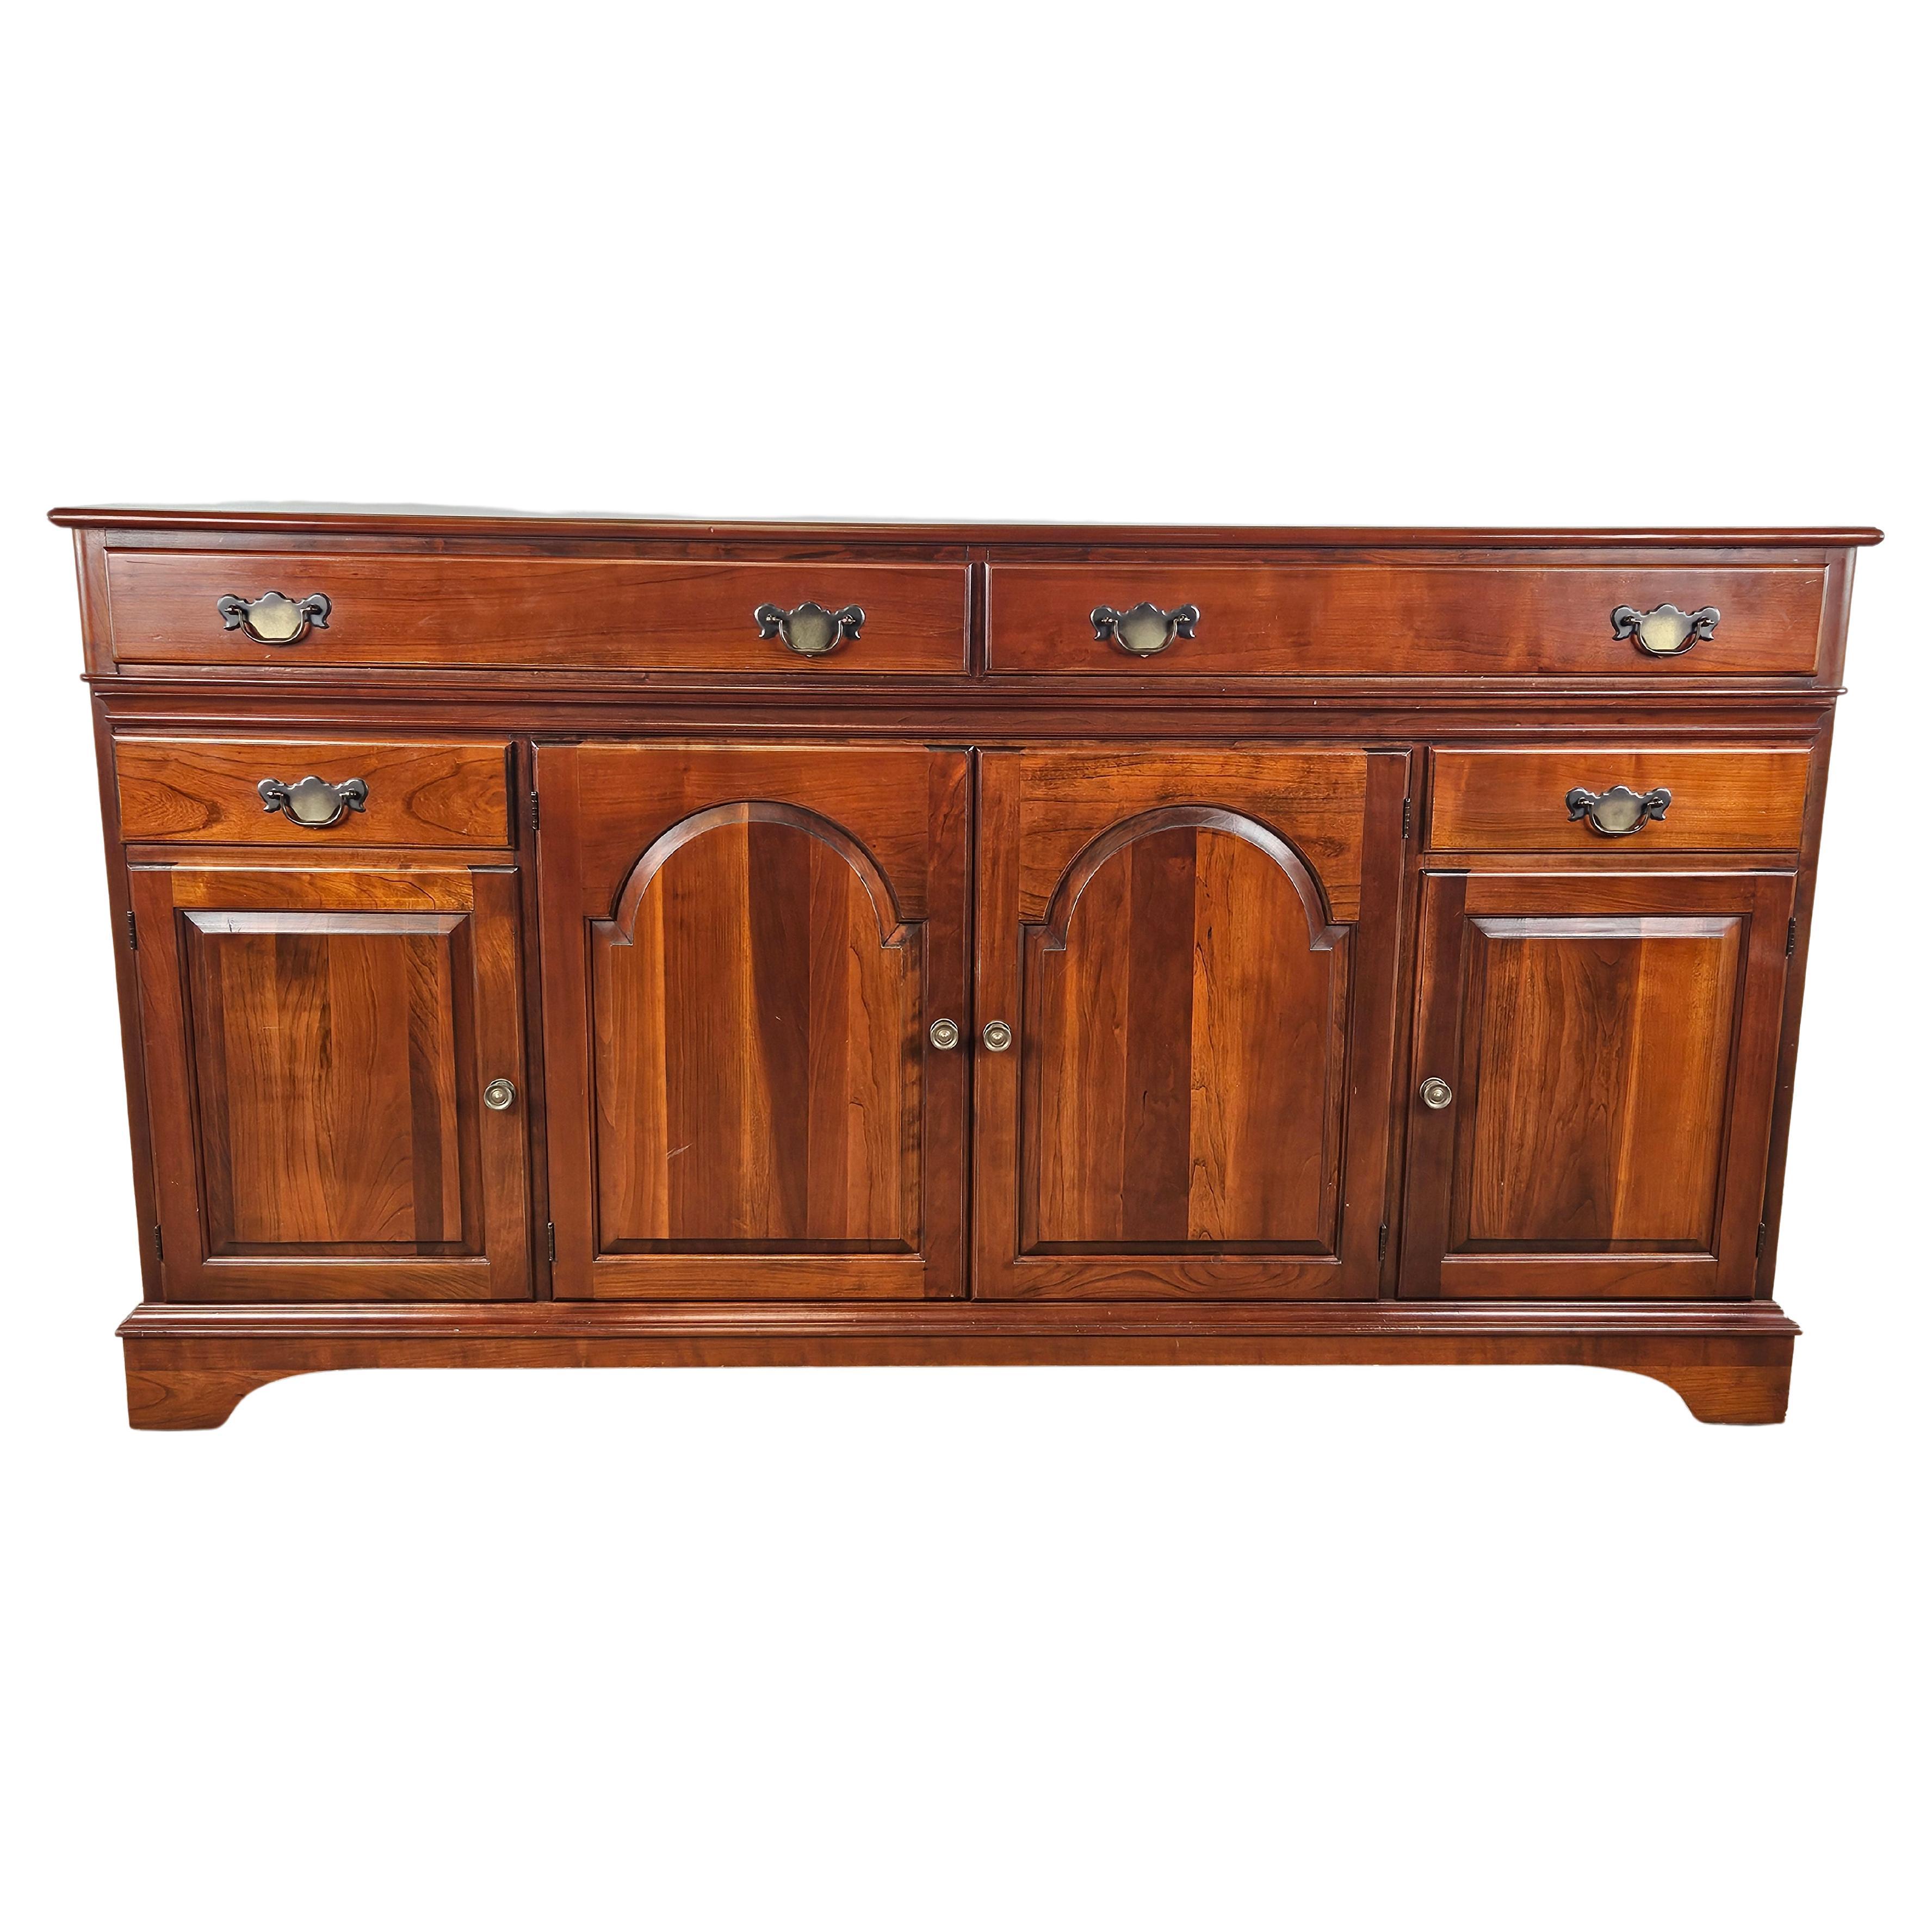 Large kitchen sideboard by Fantoni in cherry wood For Sale